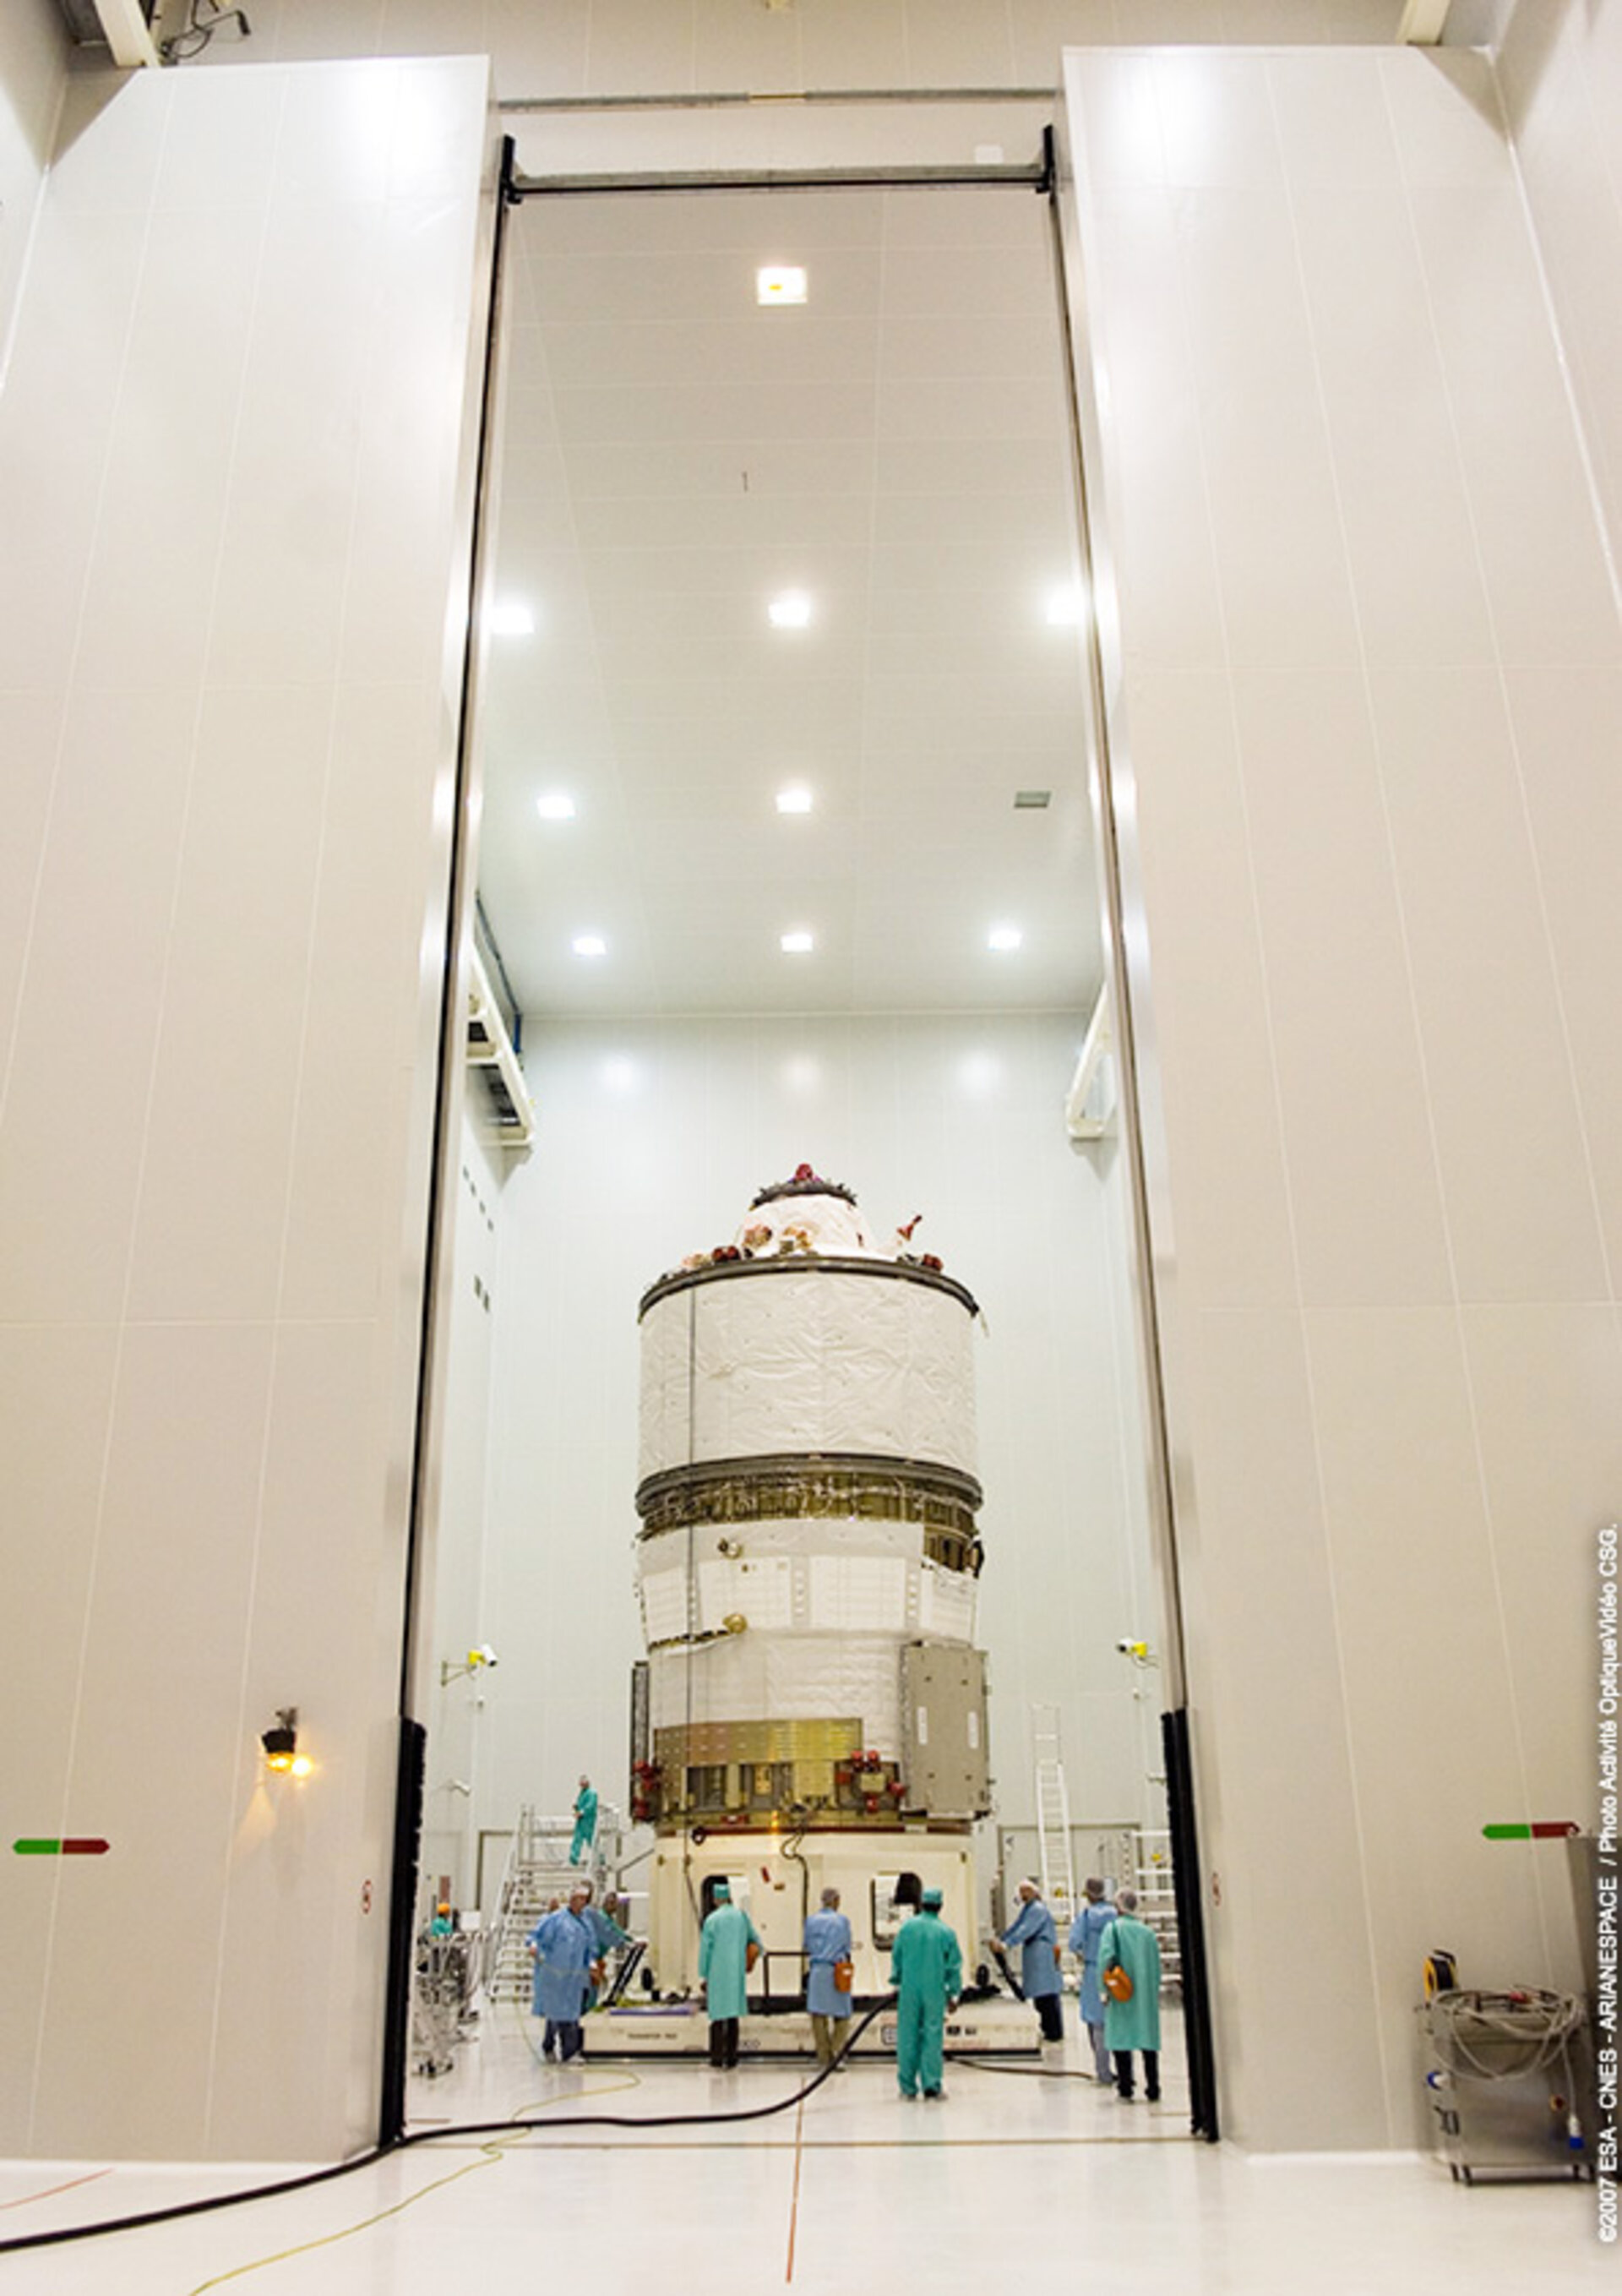 Jules Verne ATV is moved from the S5C hall to S5B - here ATV will be loaded with Russian propellants